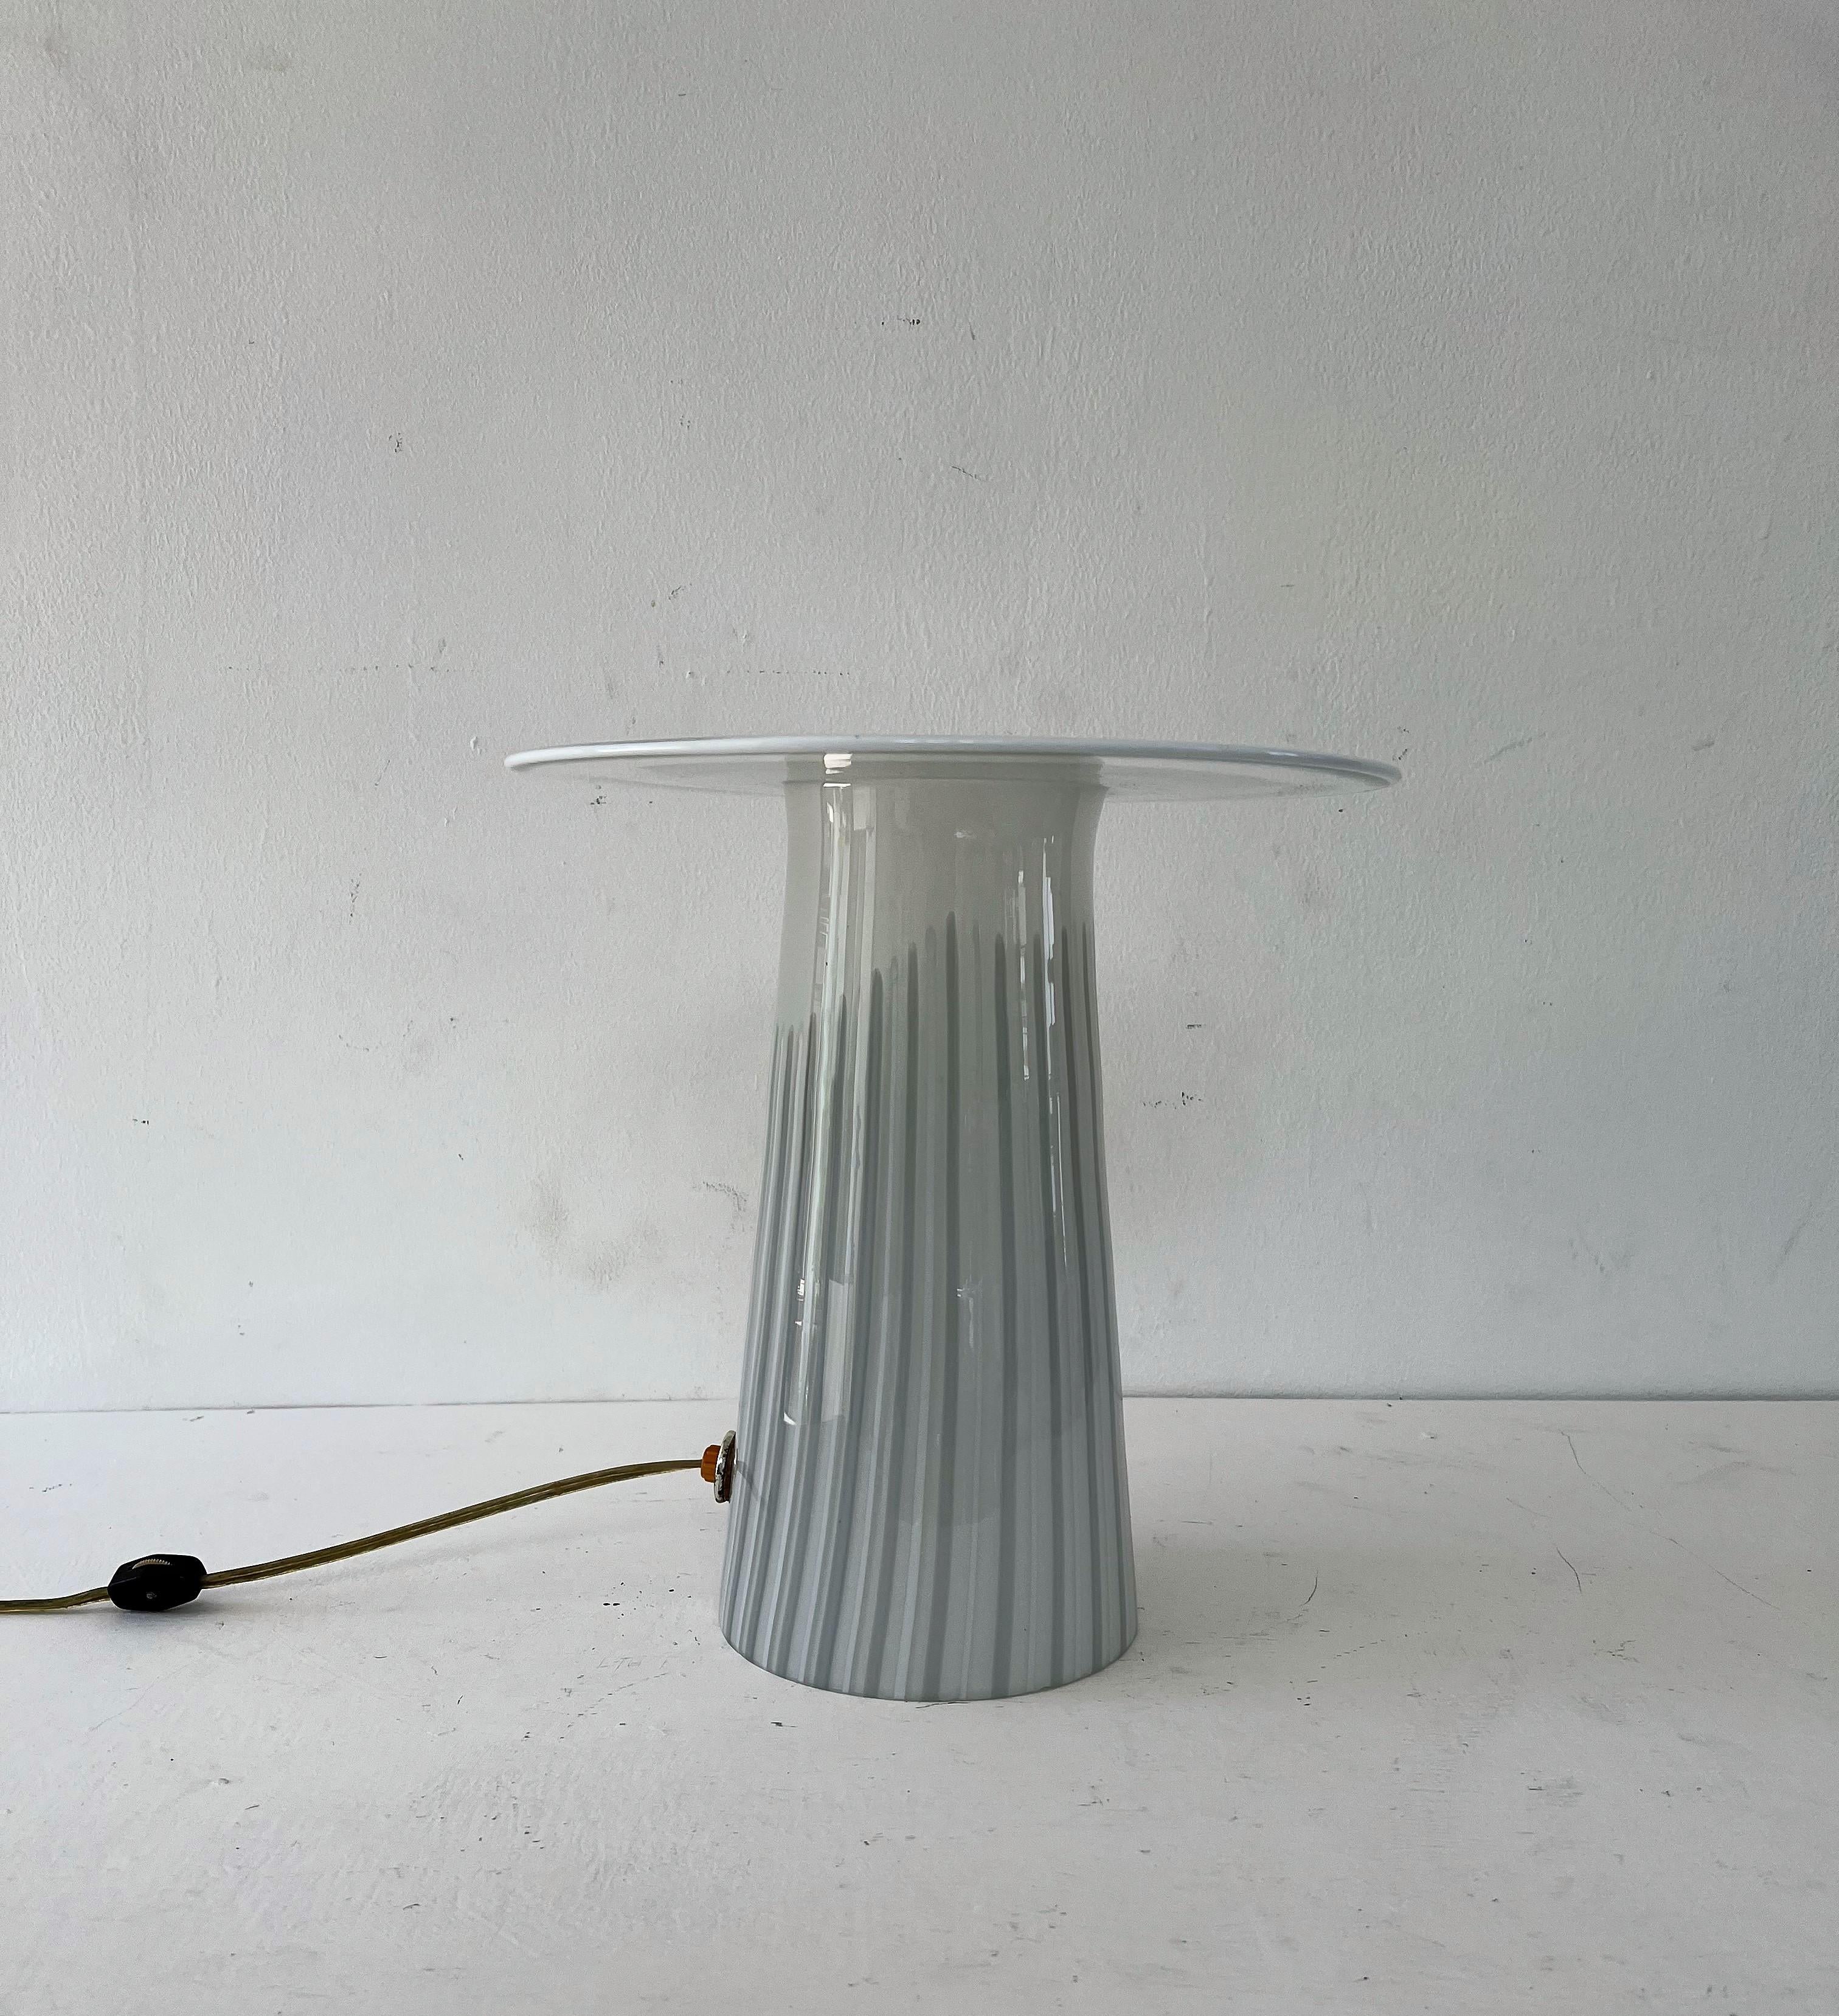 Mid-Century Modern Table Lamp in the Manner of Lino Tagliapietra, Murano 1970s For Sale 3